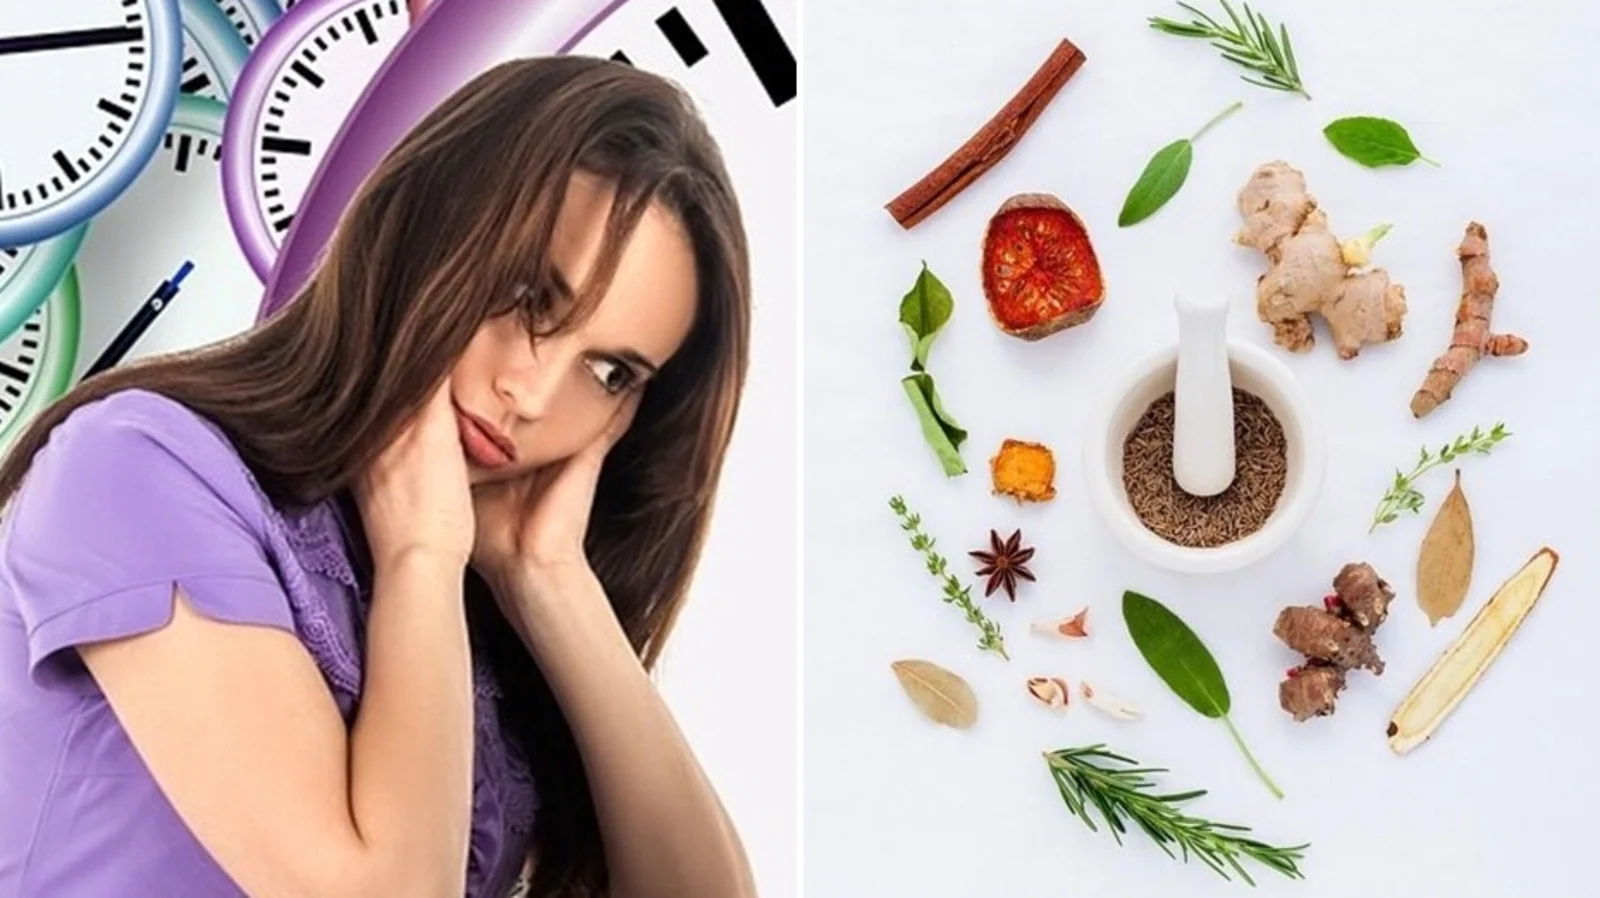 Is your period late? Ayurvedic herbs and remedies to regulate menstrual cycle